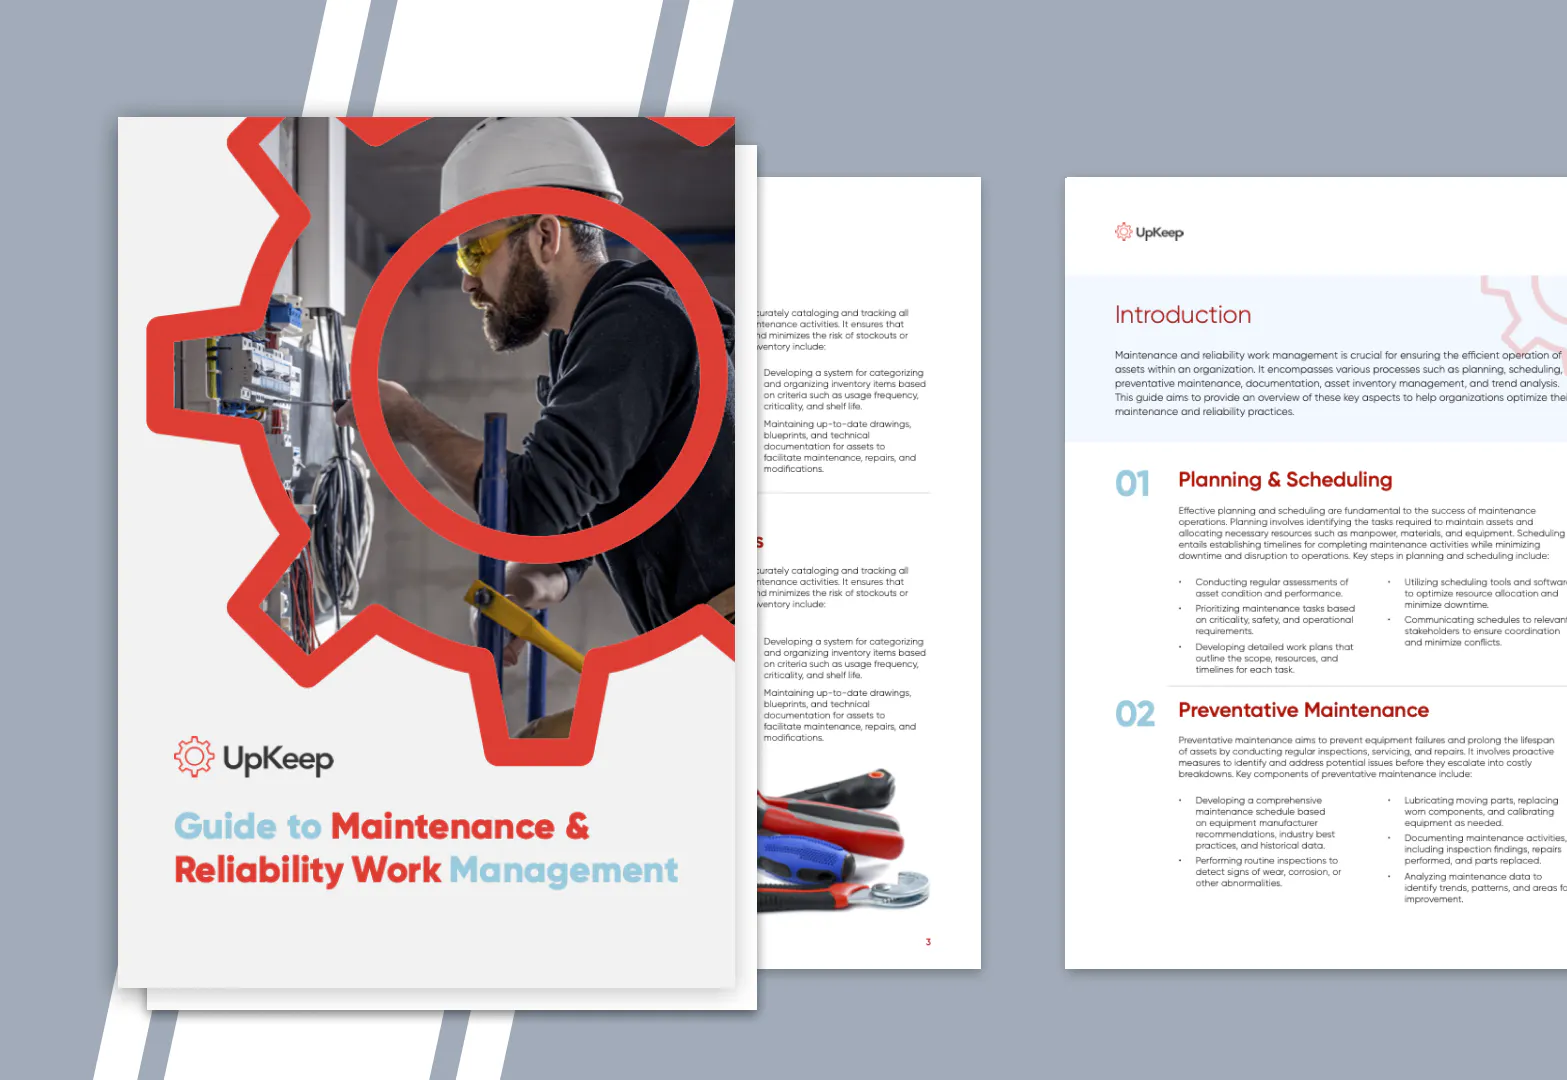 Guide to Maintenance & Reliability Work Management